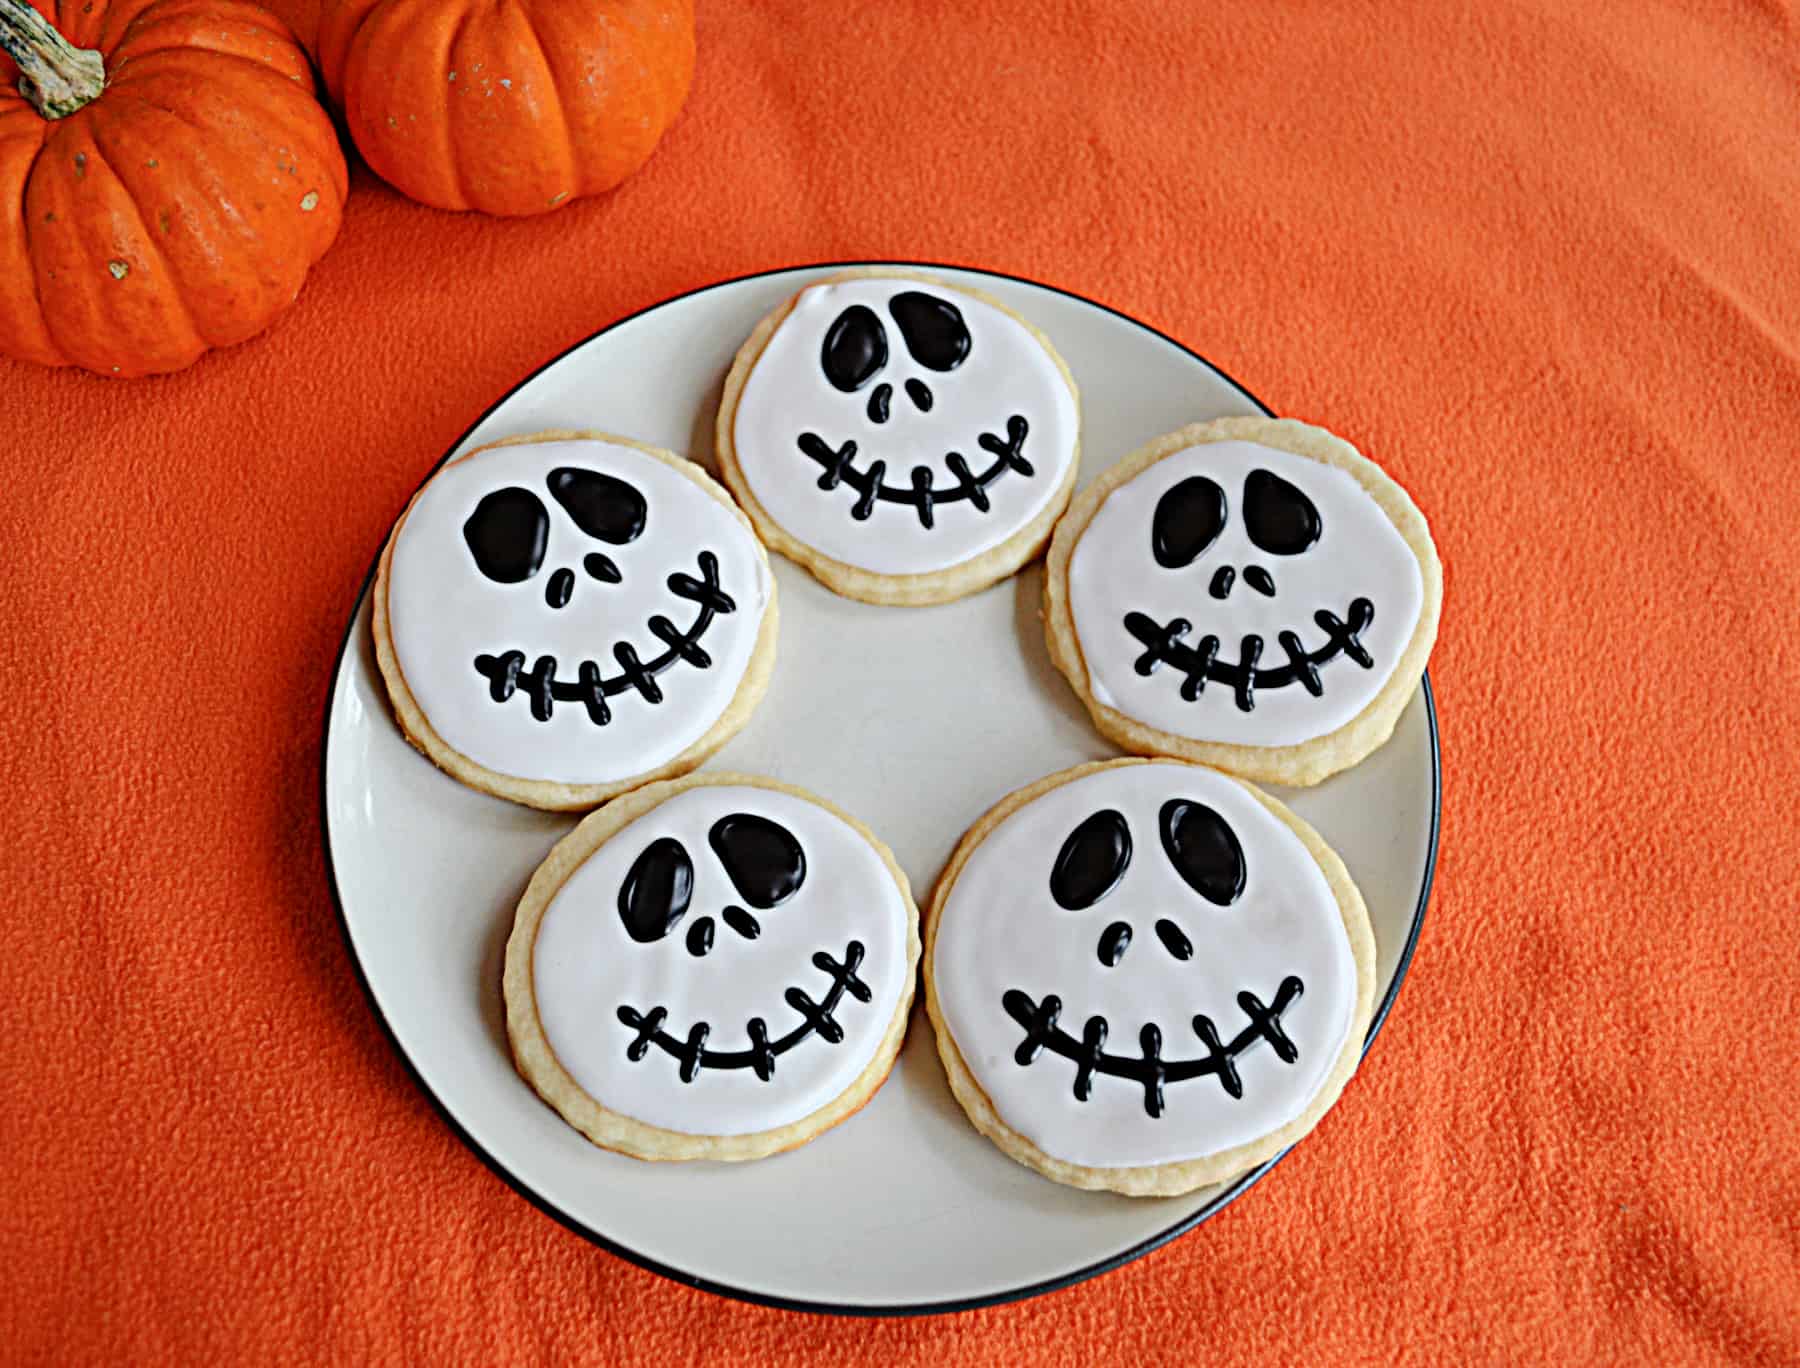 A plate with 5 Jack Skellington face cookies on it.